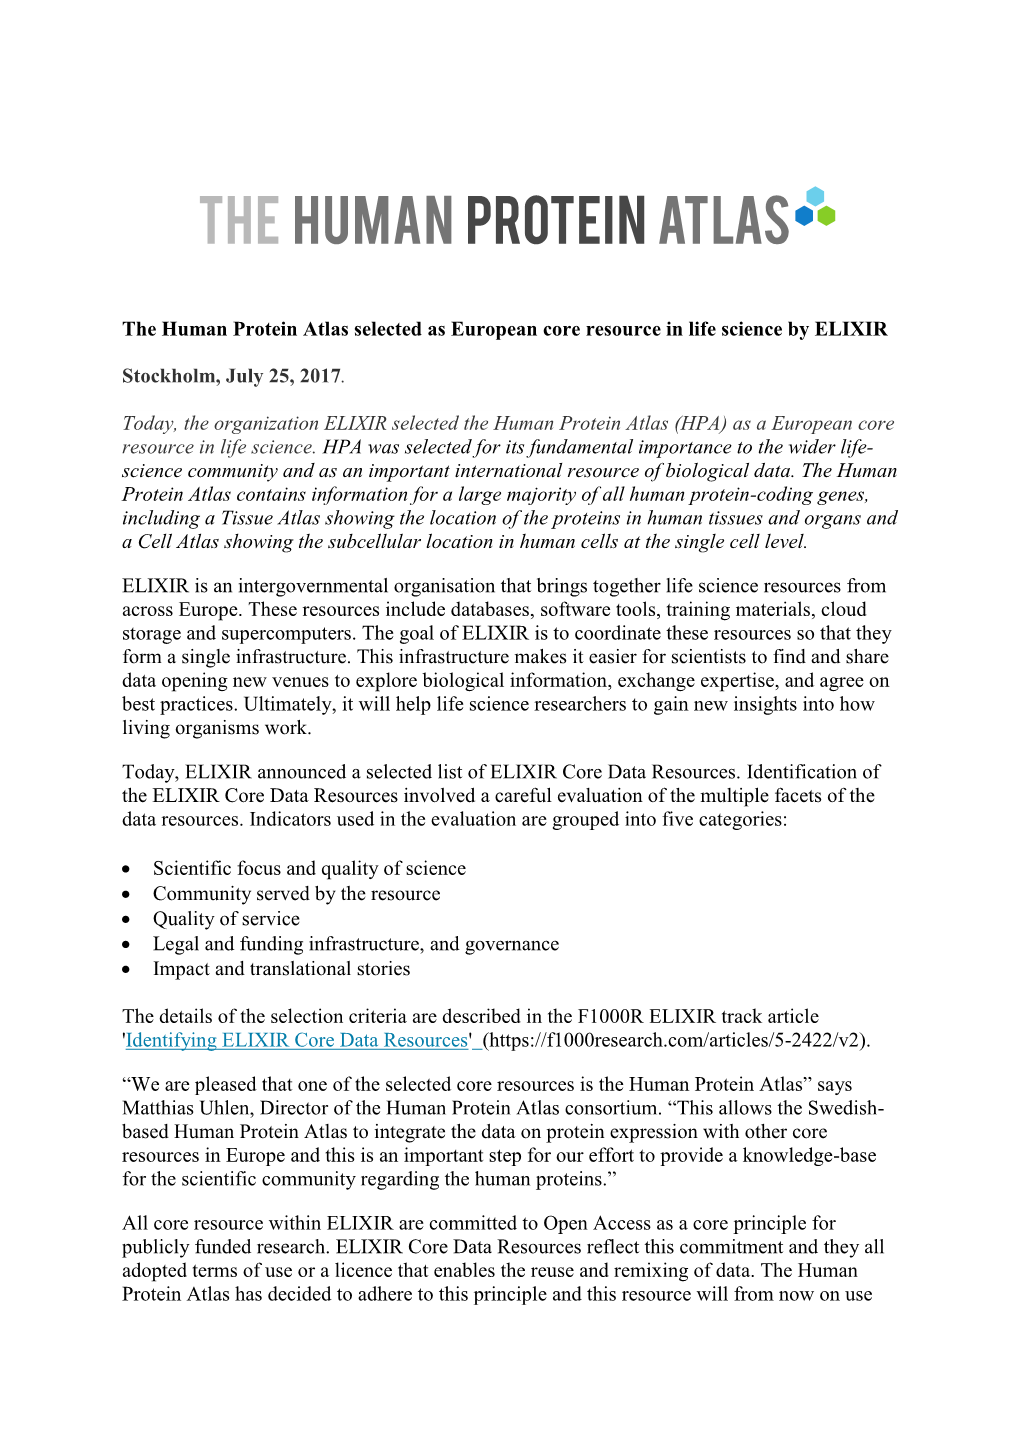 The Human Protein Atlas Selected As European Core Resource in Life Science by ELIXIR